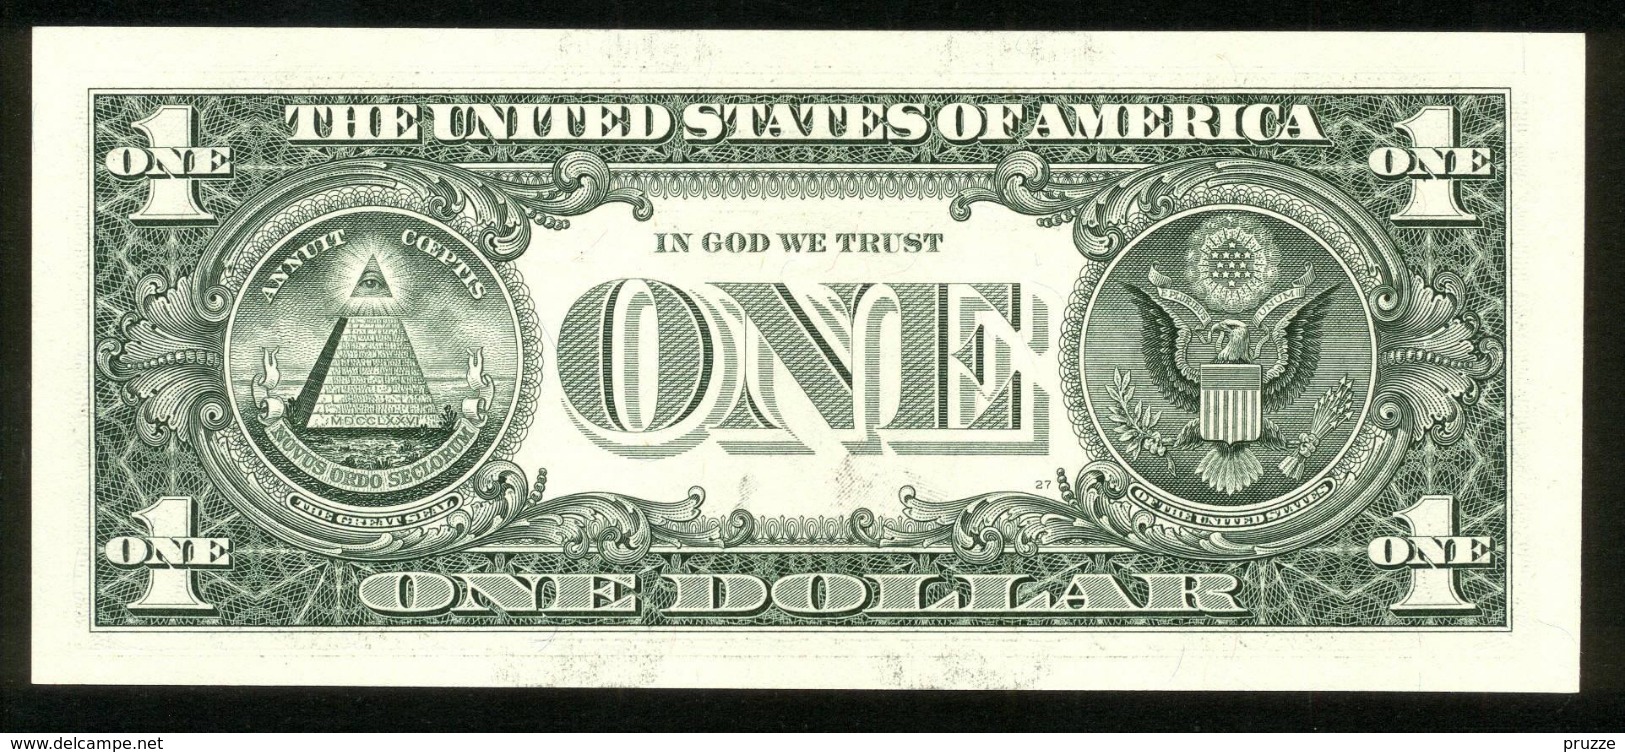 USA 2009, Federal Reserve Note, 1 $, One Dollar, D = Cleveland, Ohio - D18572921A - UNC - Erhaltung I - Federal Reserve (1928-...)